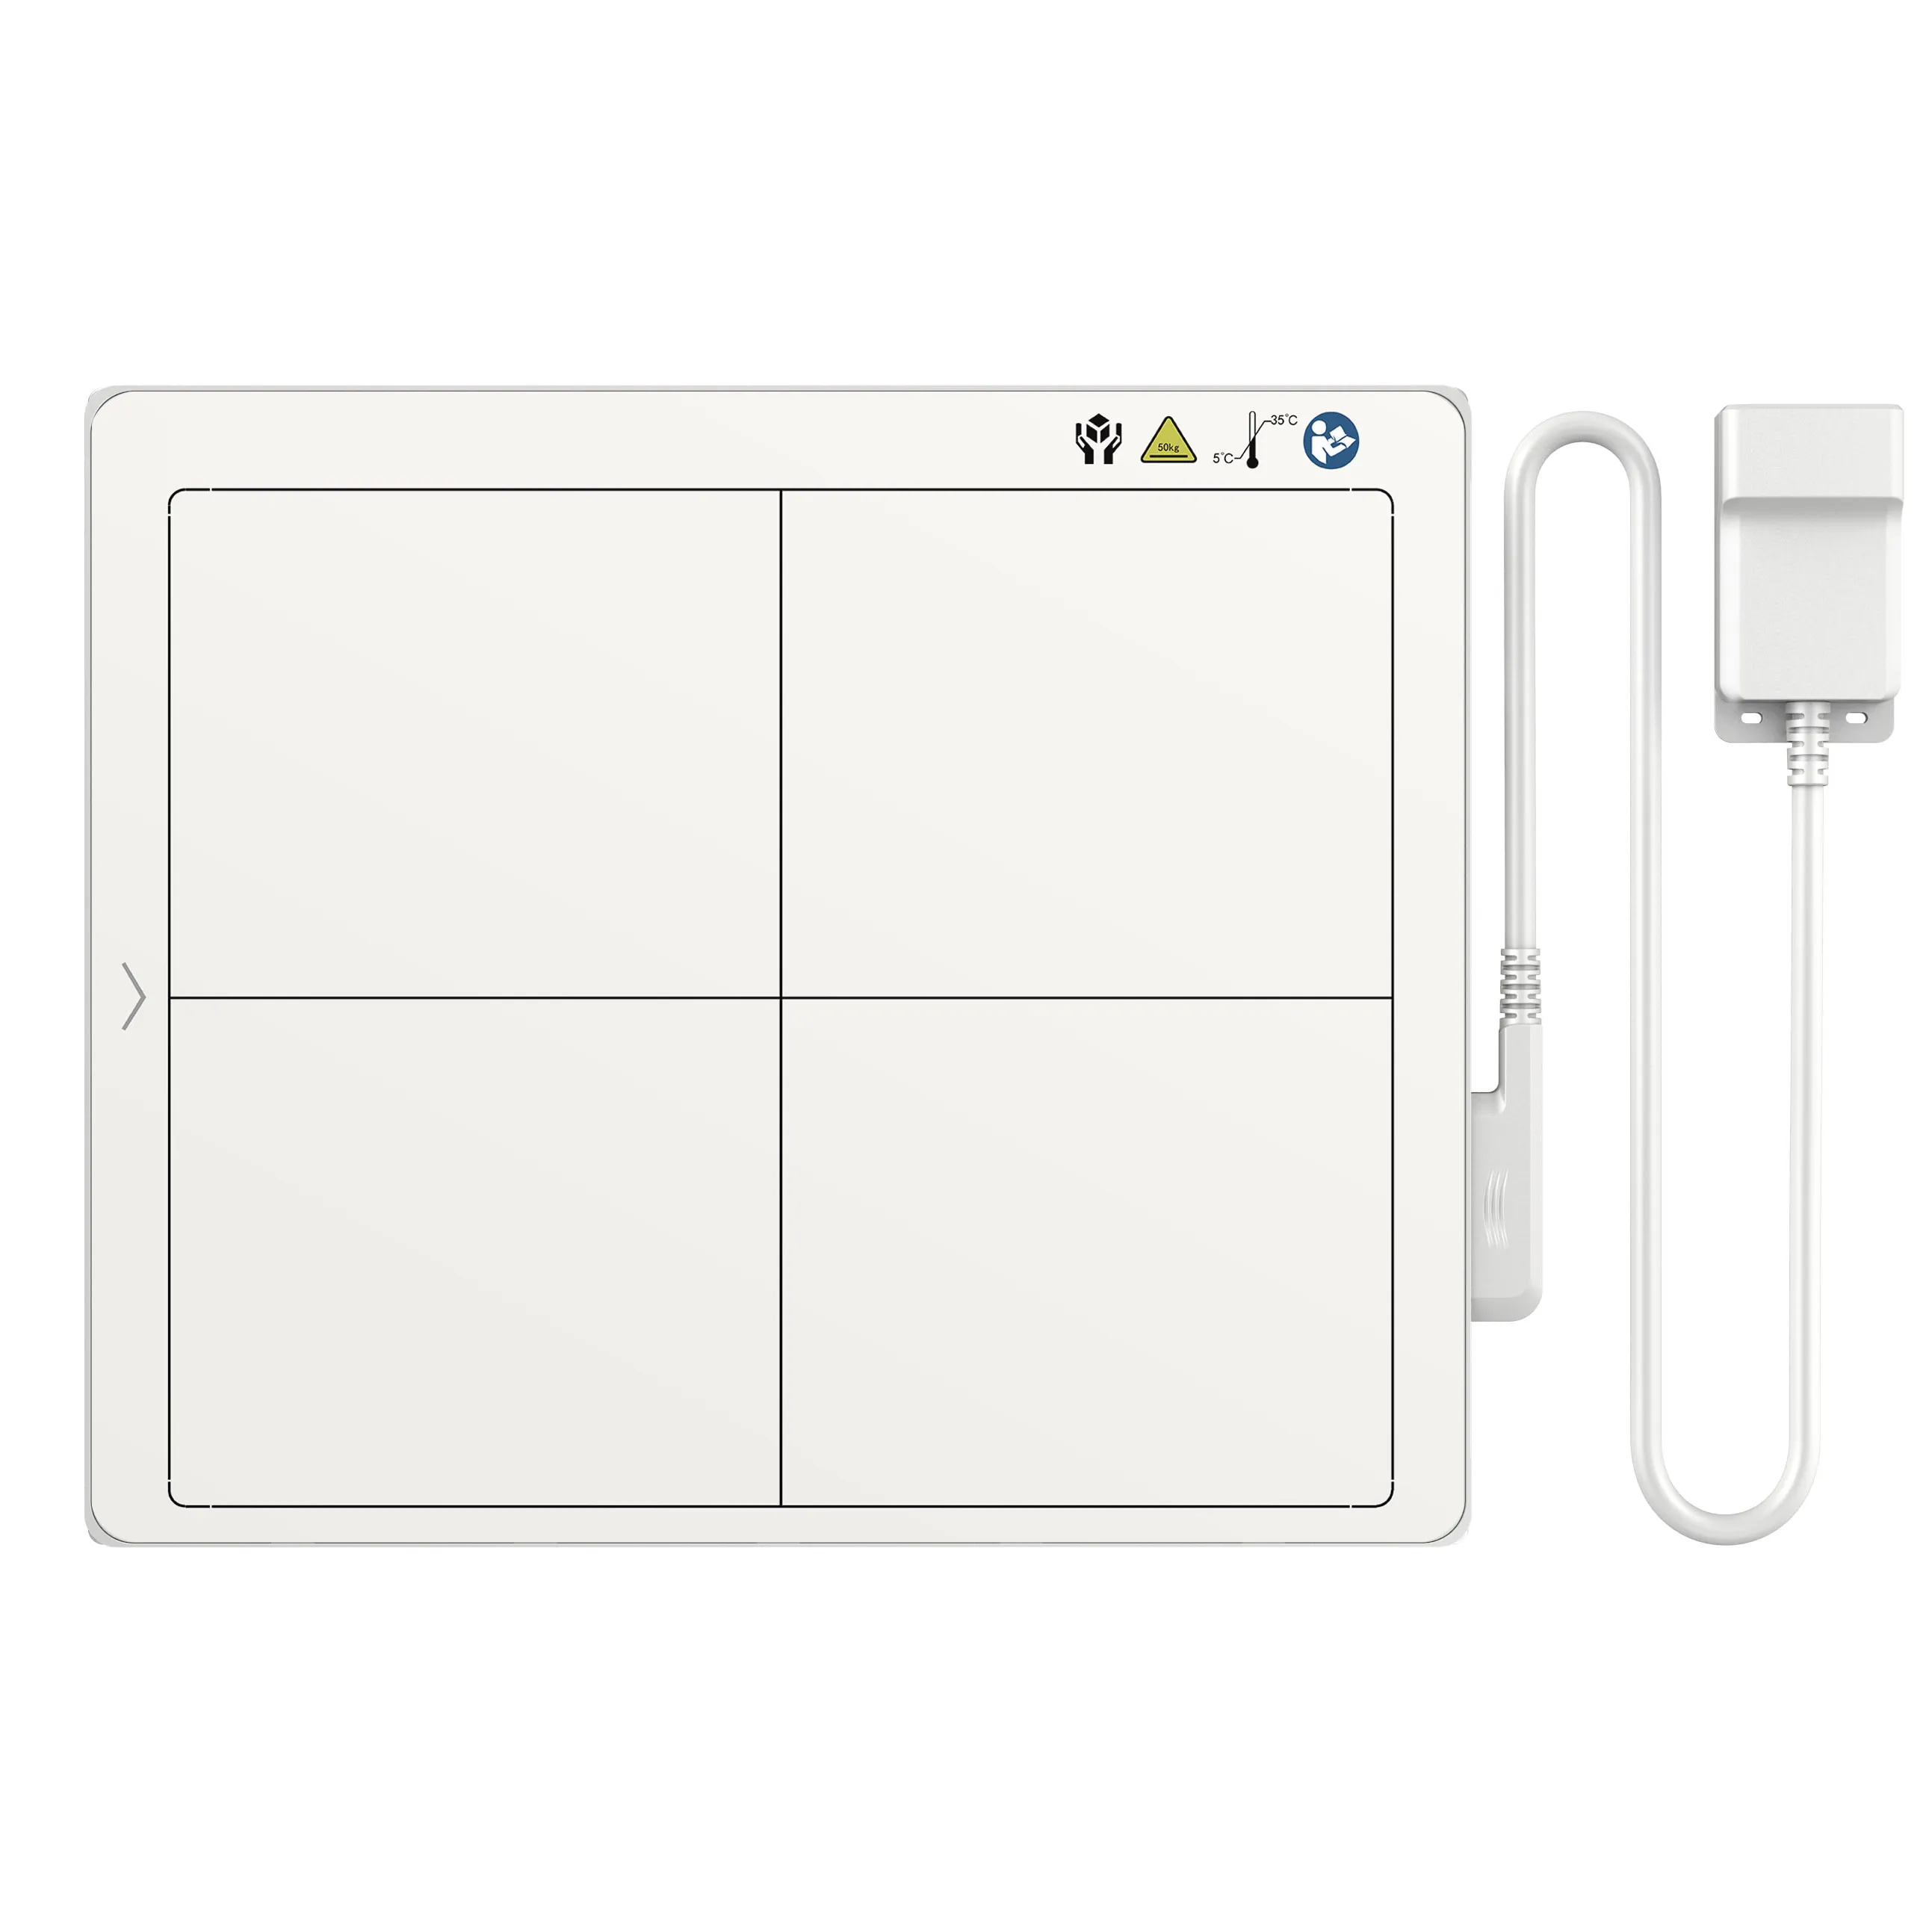 Excellent 10*12 tethered Flat Panel Detector